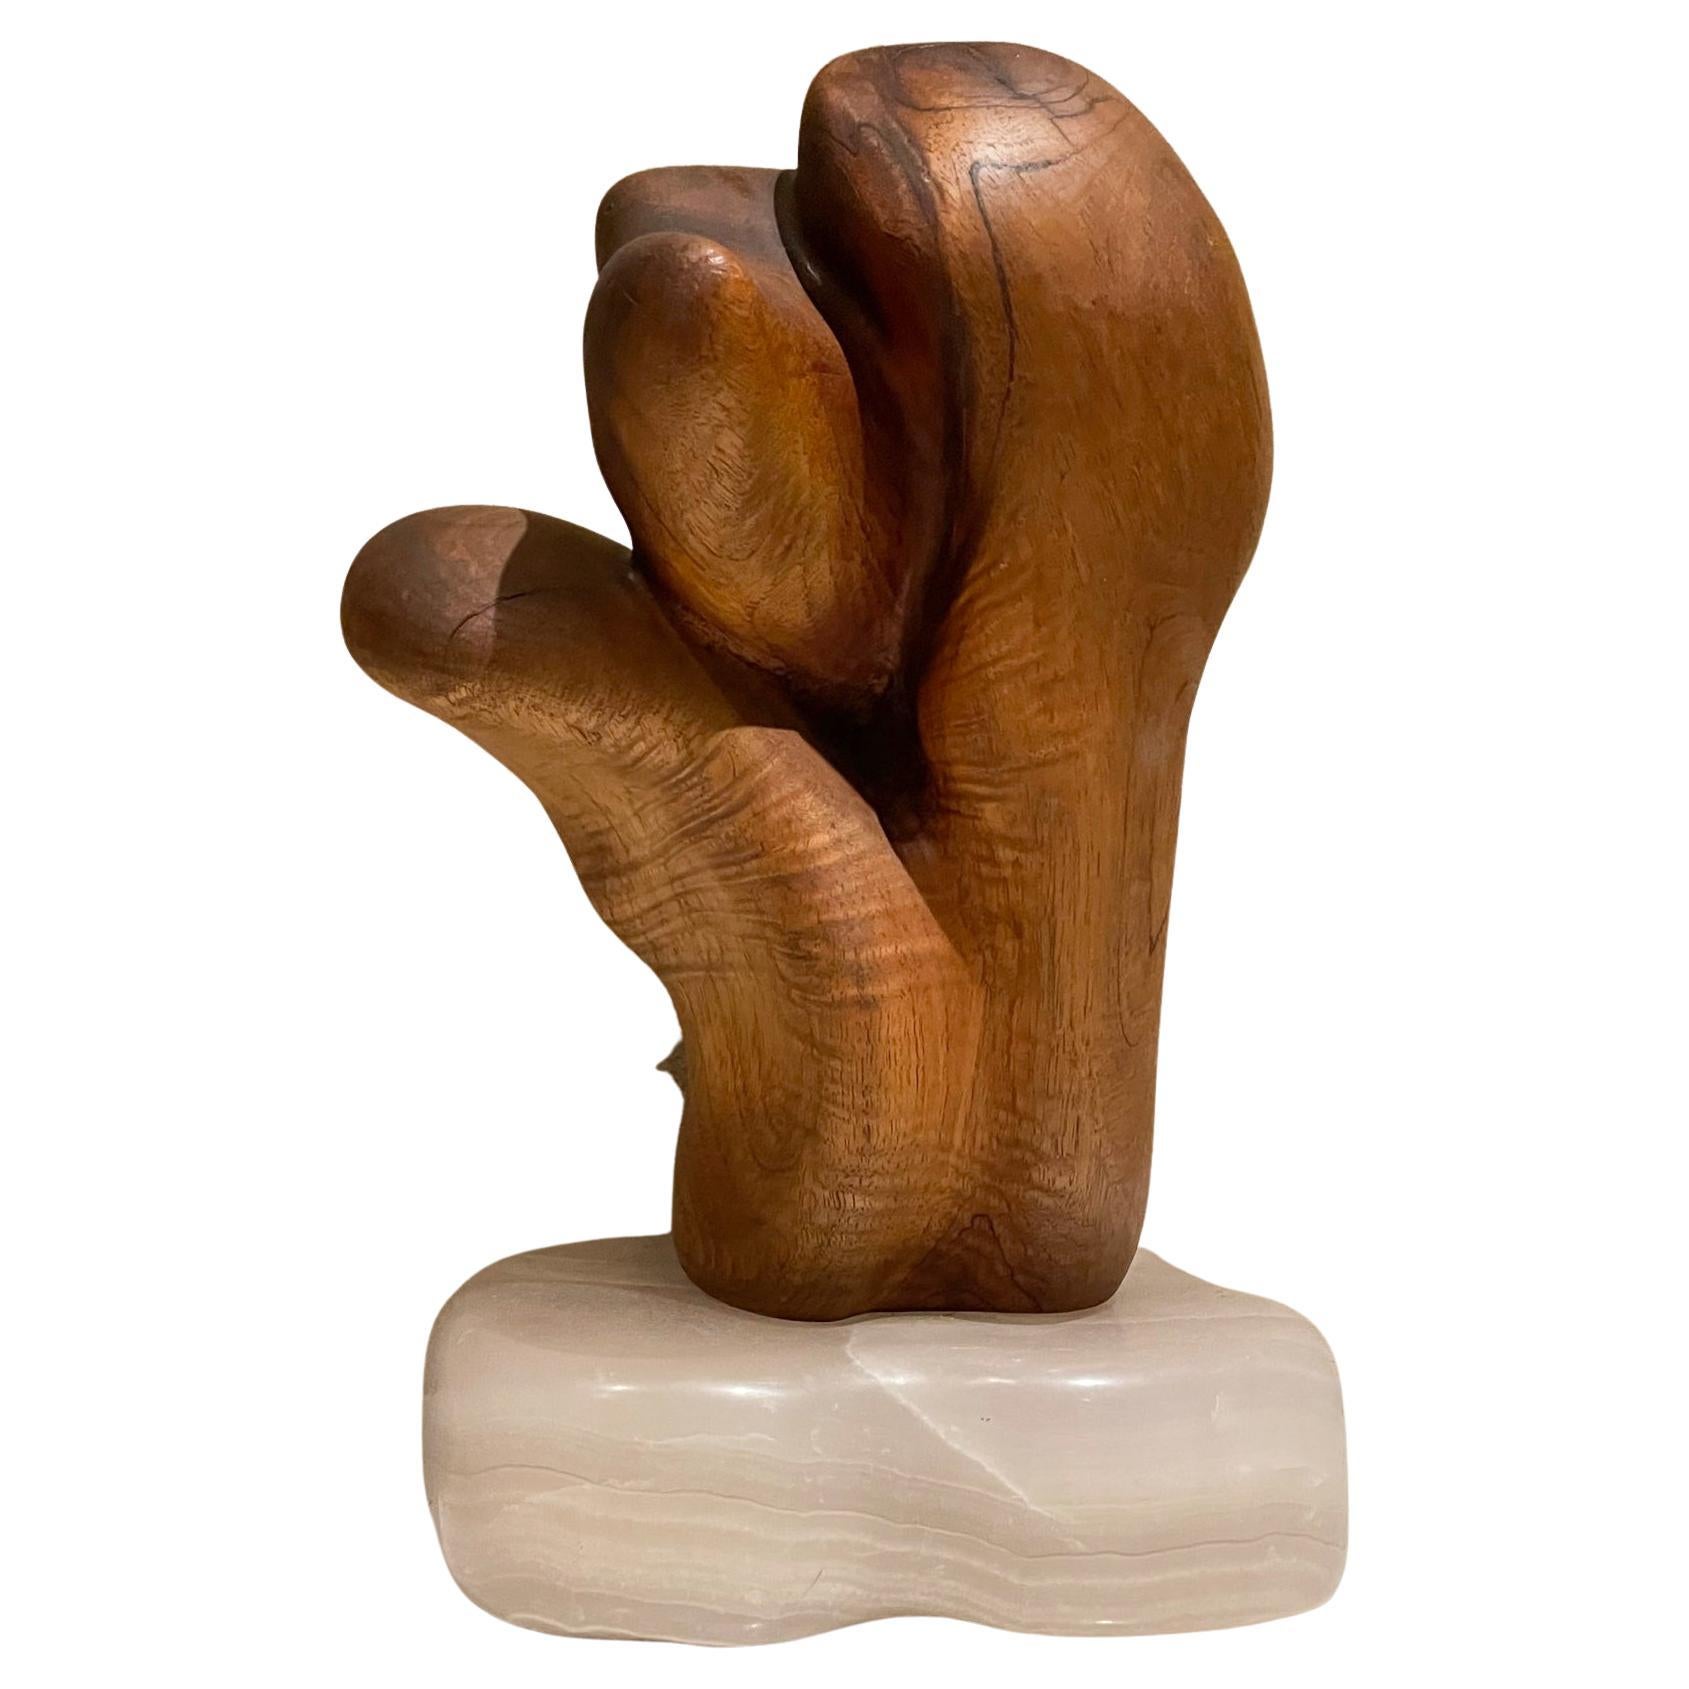 Abstract Organic Form Exquisite Wood Grain Sculpture on Translucent Stone Base For Sale